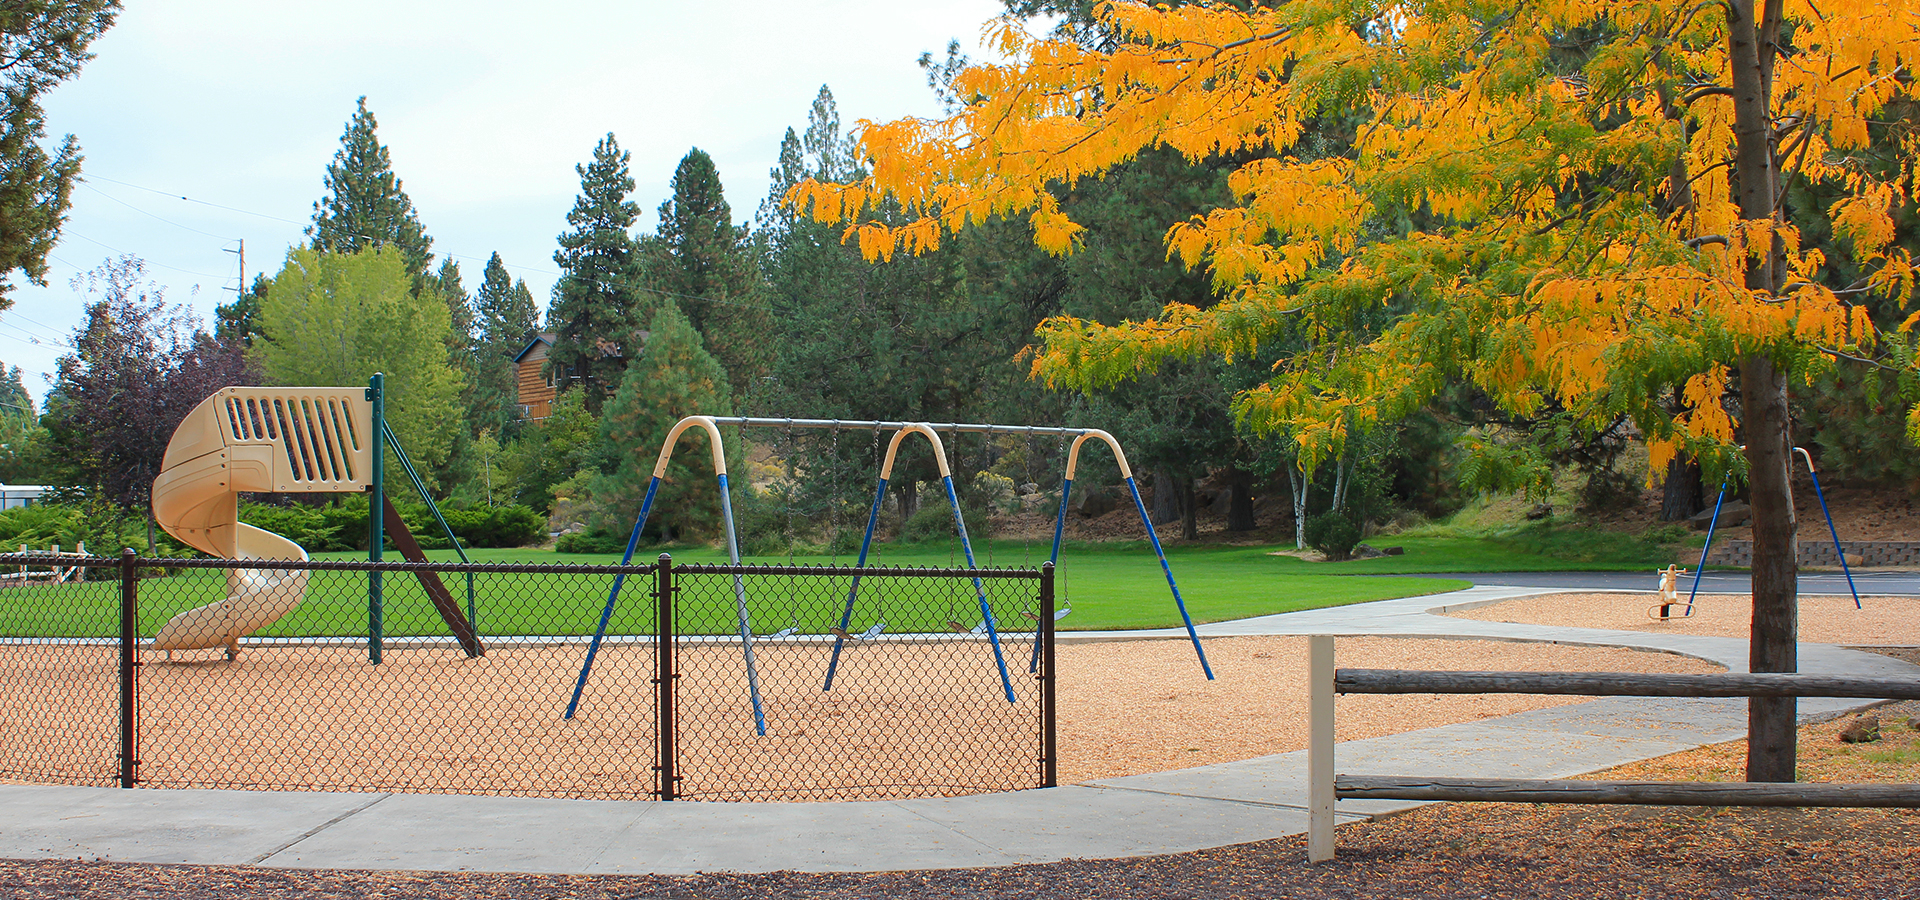 The swings at Woodriver Park.